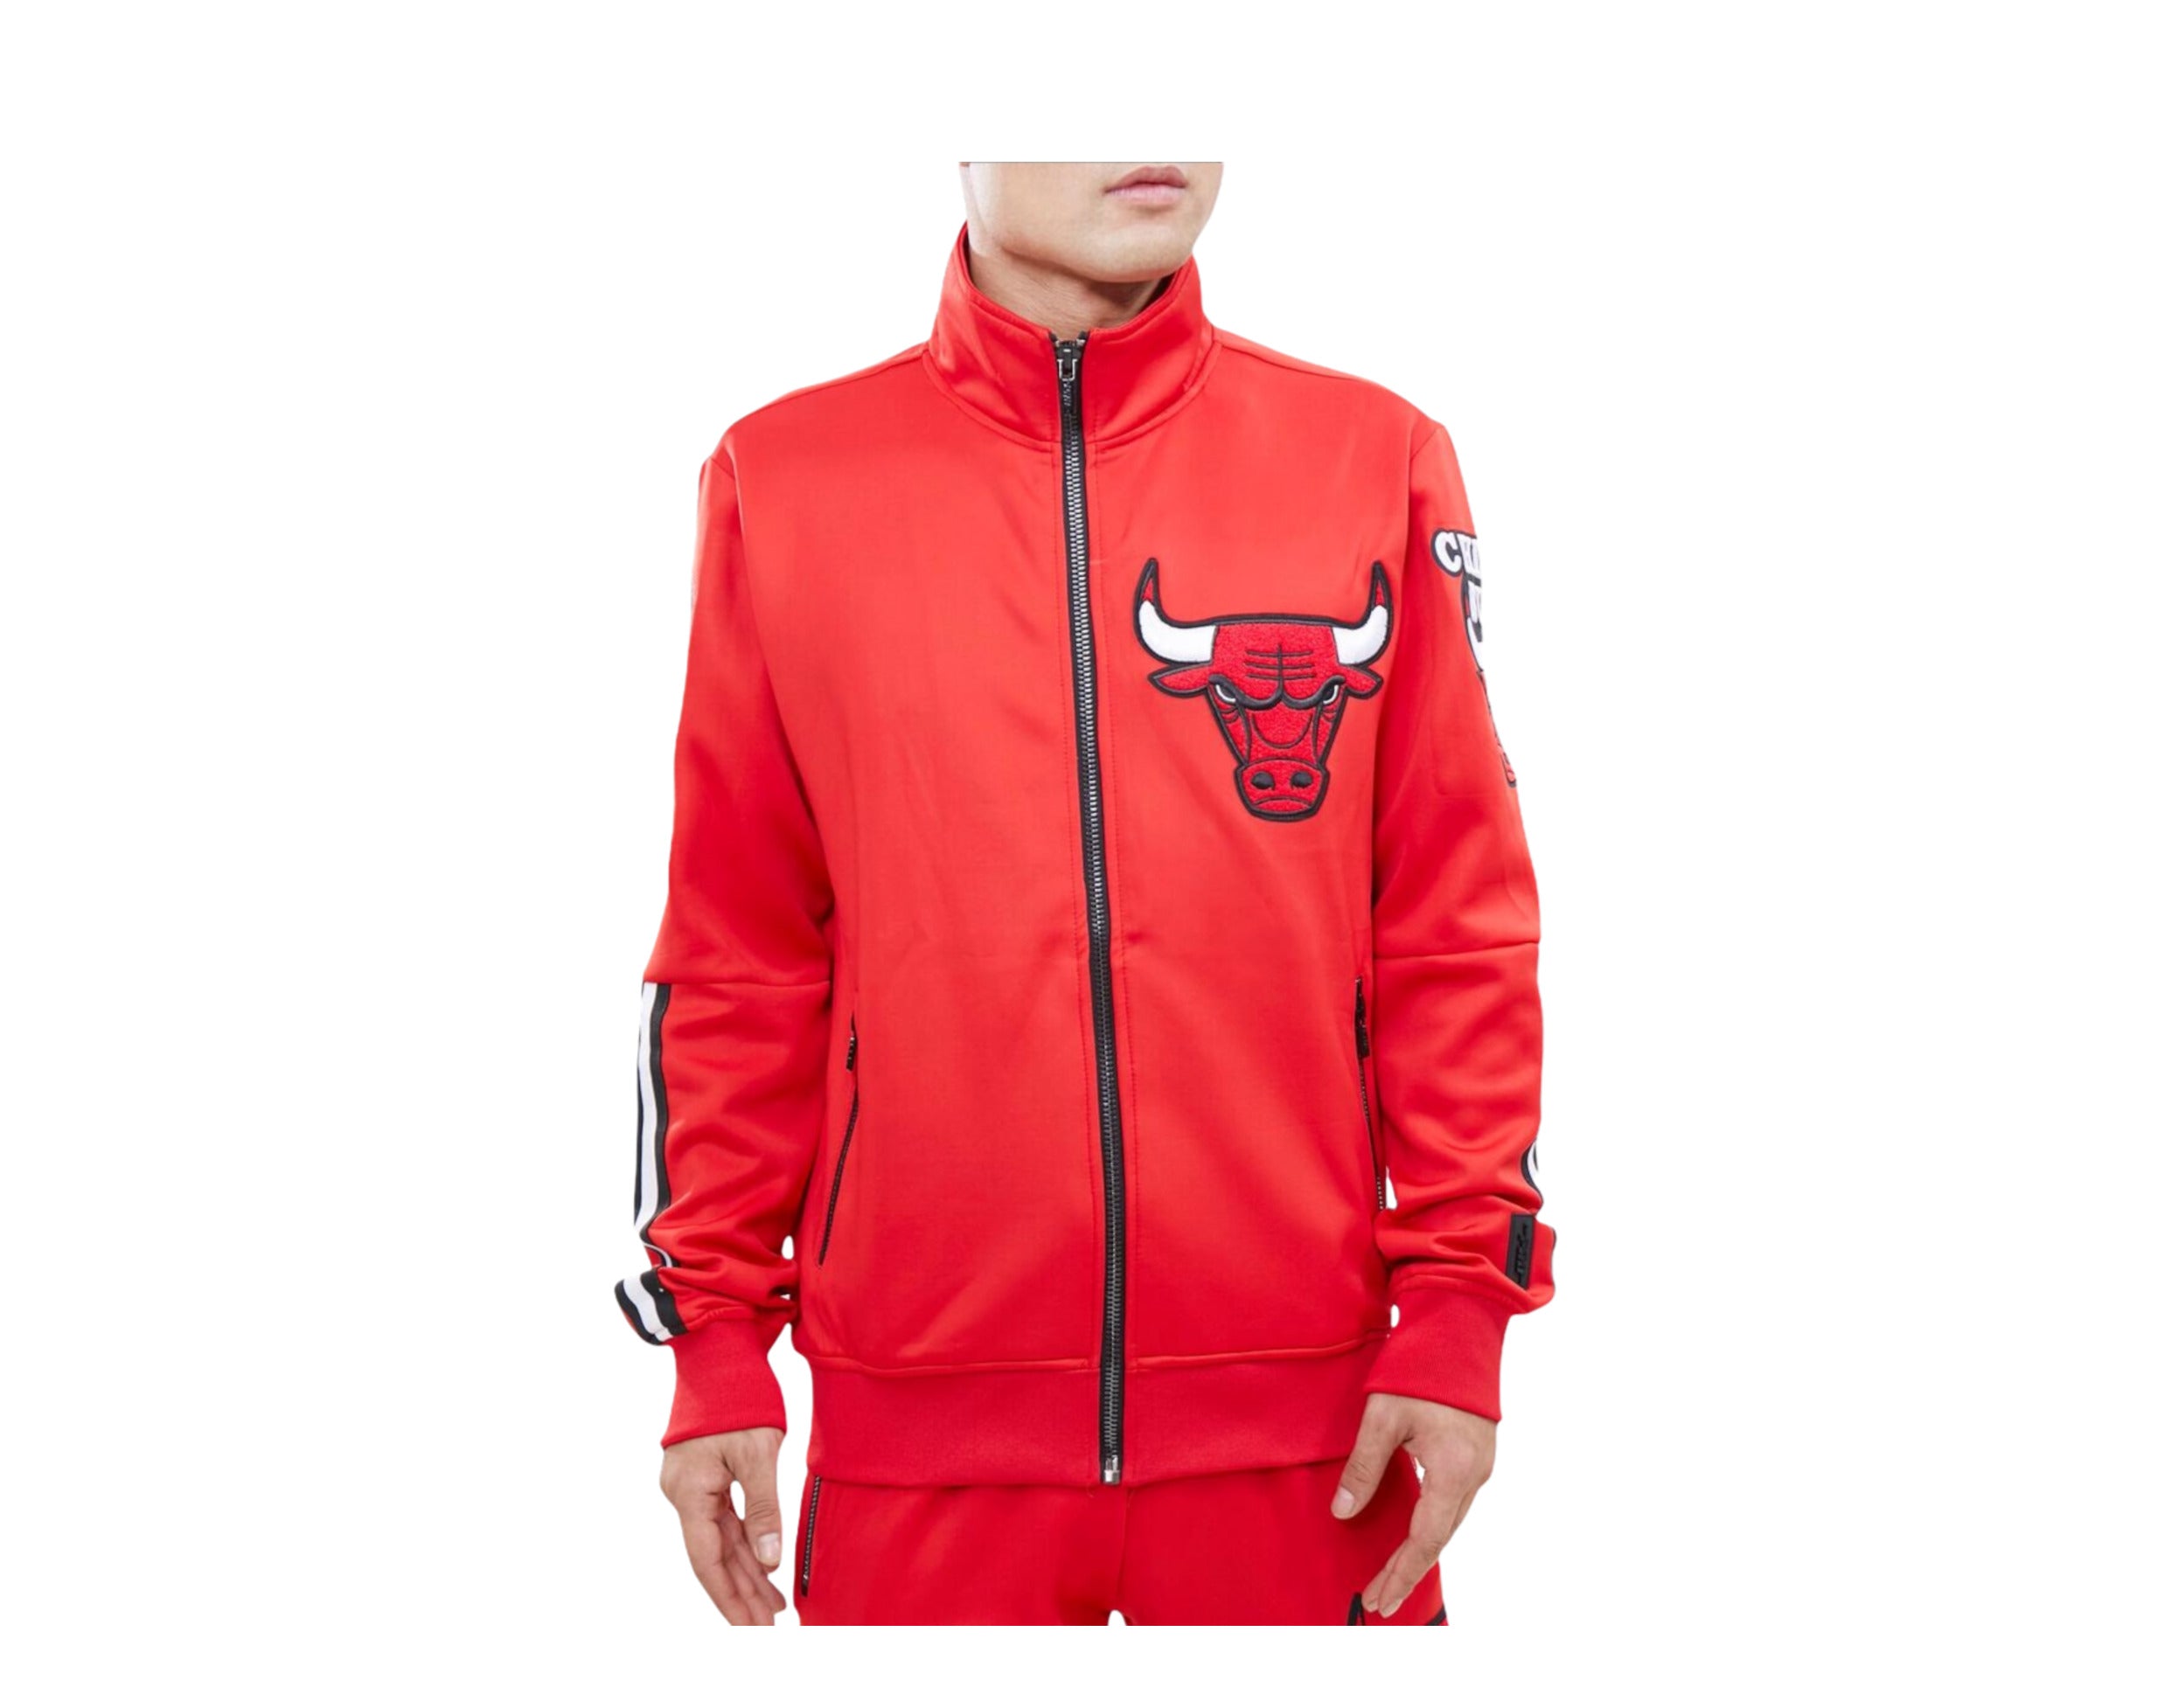 Mitchell & Ness NBA CHICAGO BULLS AUTHENTIC WARM UP JACKET - Club wear -  red 